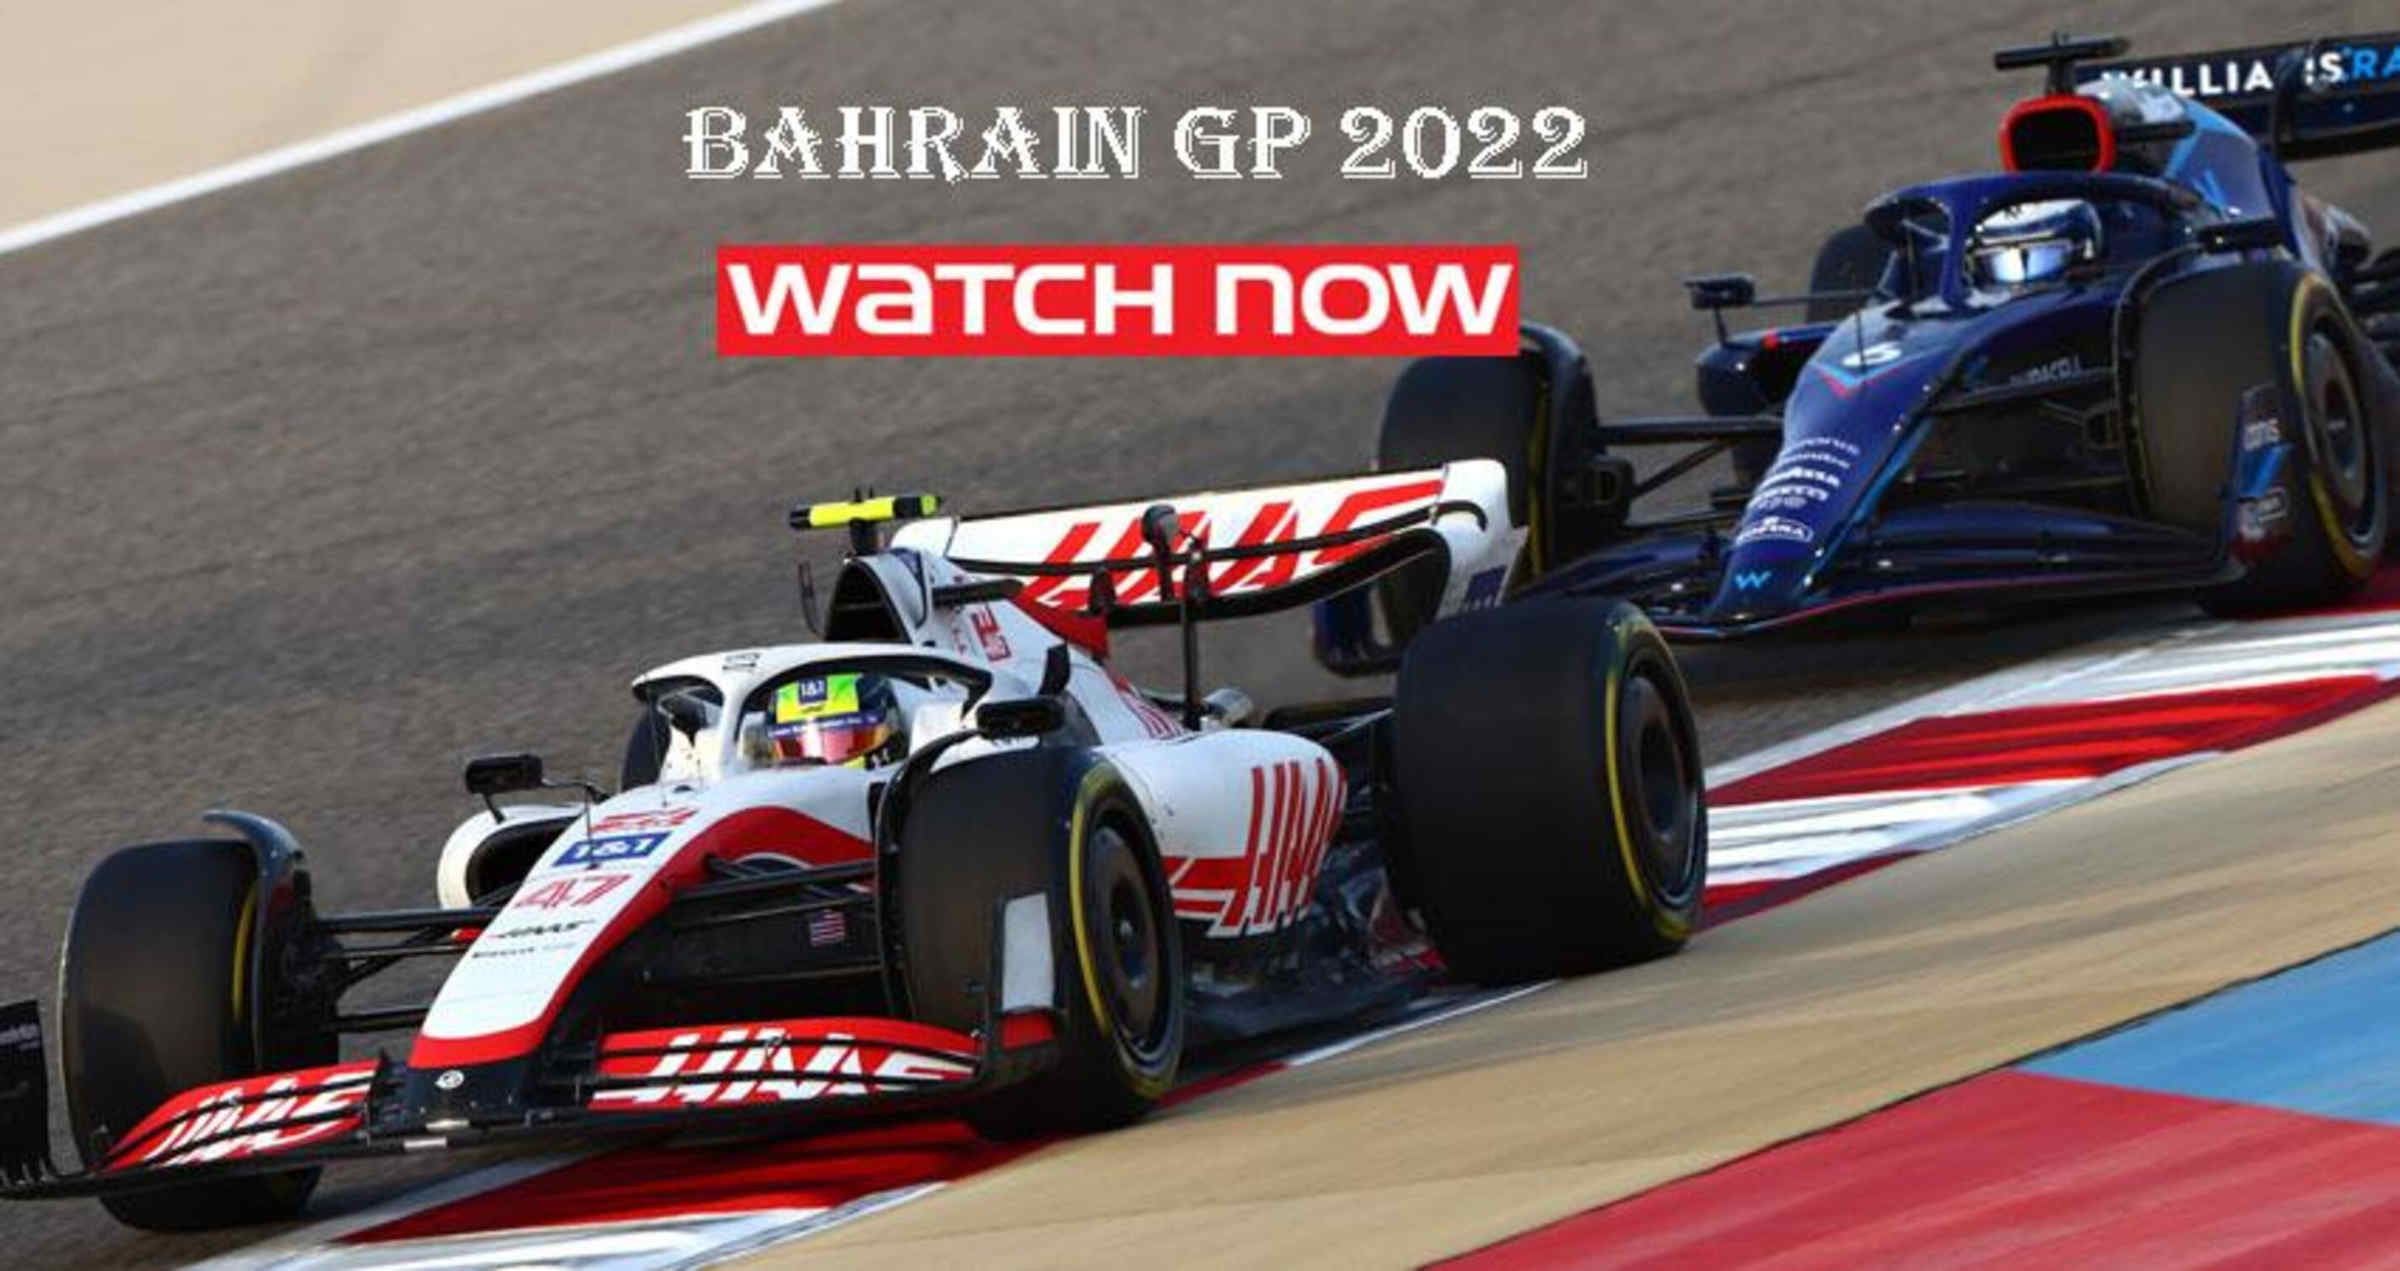 F1 Race! Bahrain GP live stream free from anywhere